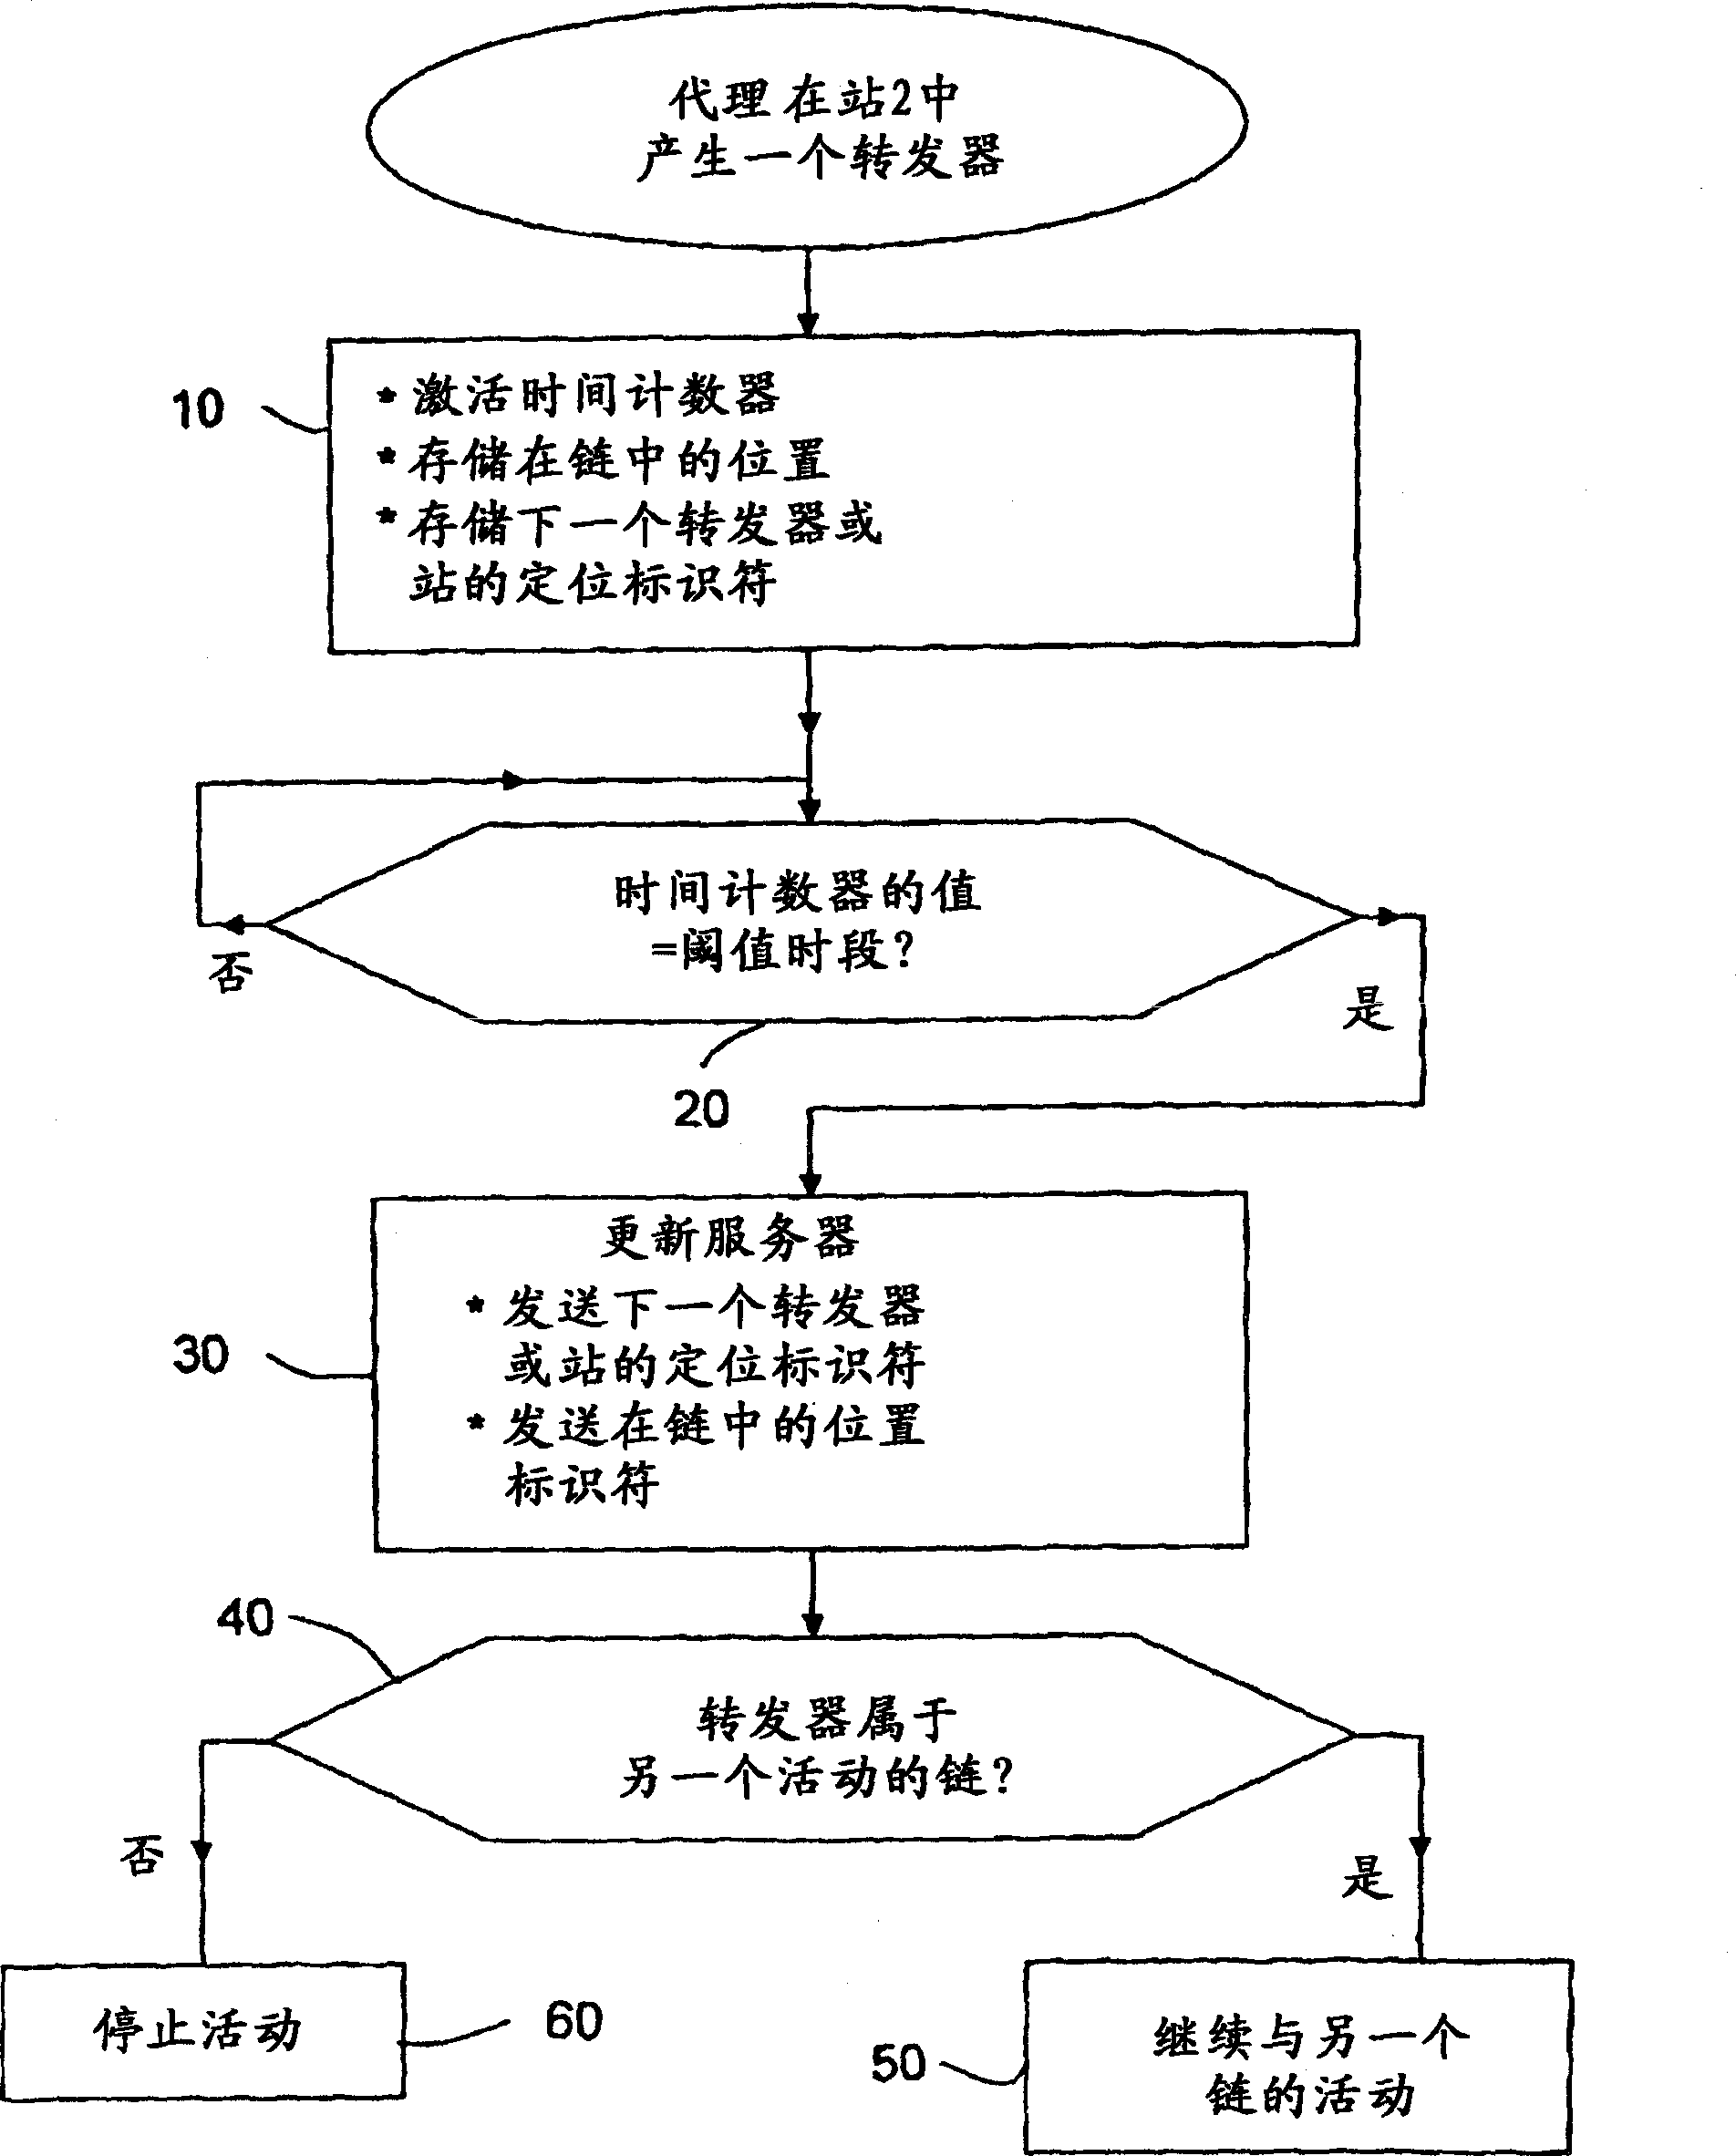 Method of locating mobile communicating objects within a communications network